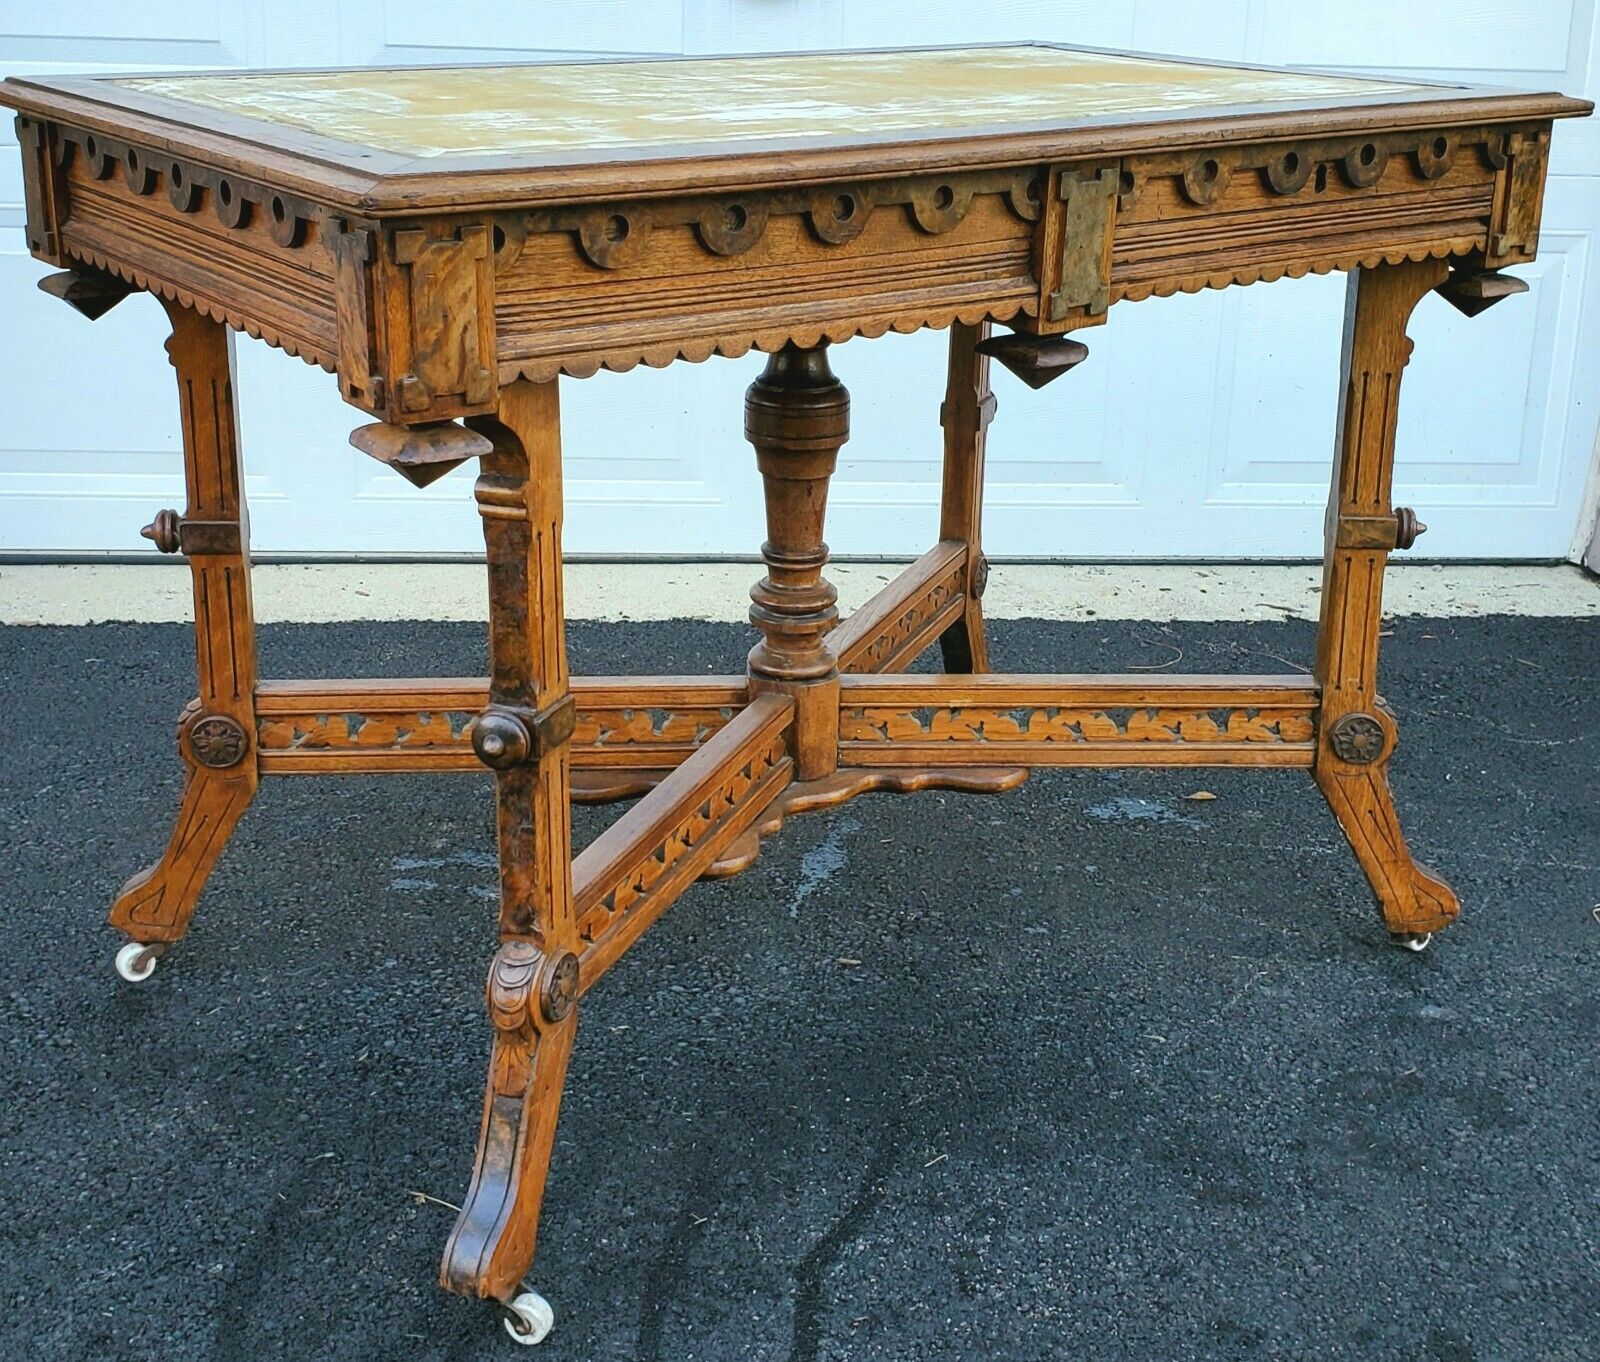 Antique Eastlake Victorian Carved Walnut Burl Wood Table with Drawers No Top 